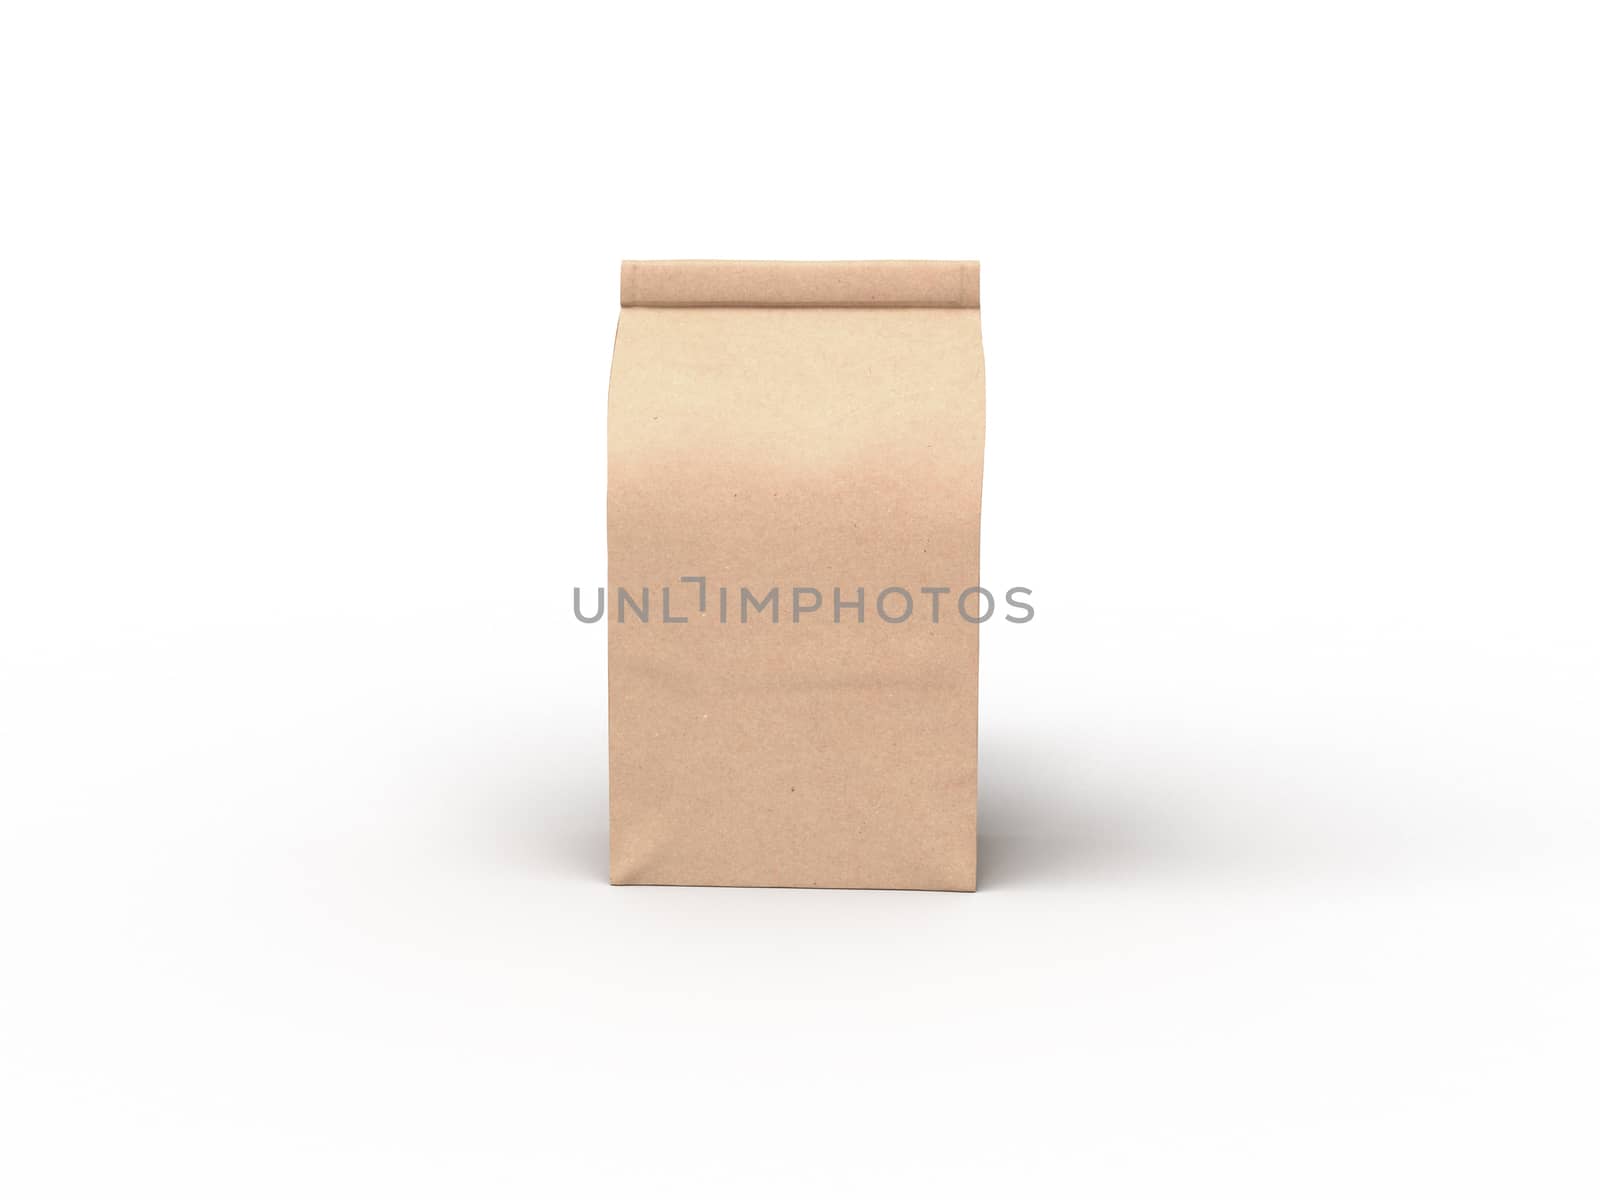 The coffee beam bag packaging mock-up design on white studio stage background by cougarsan